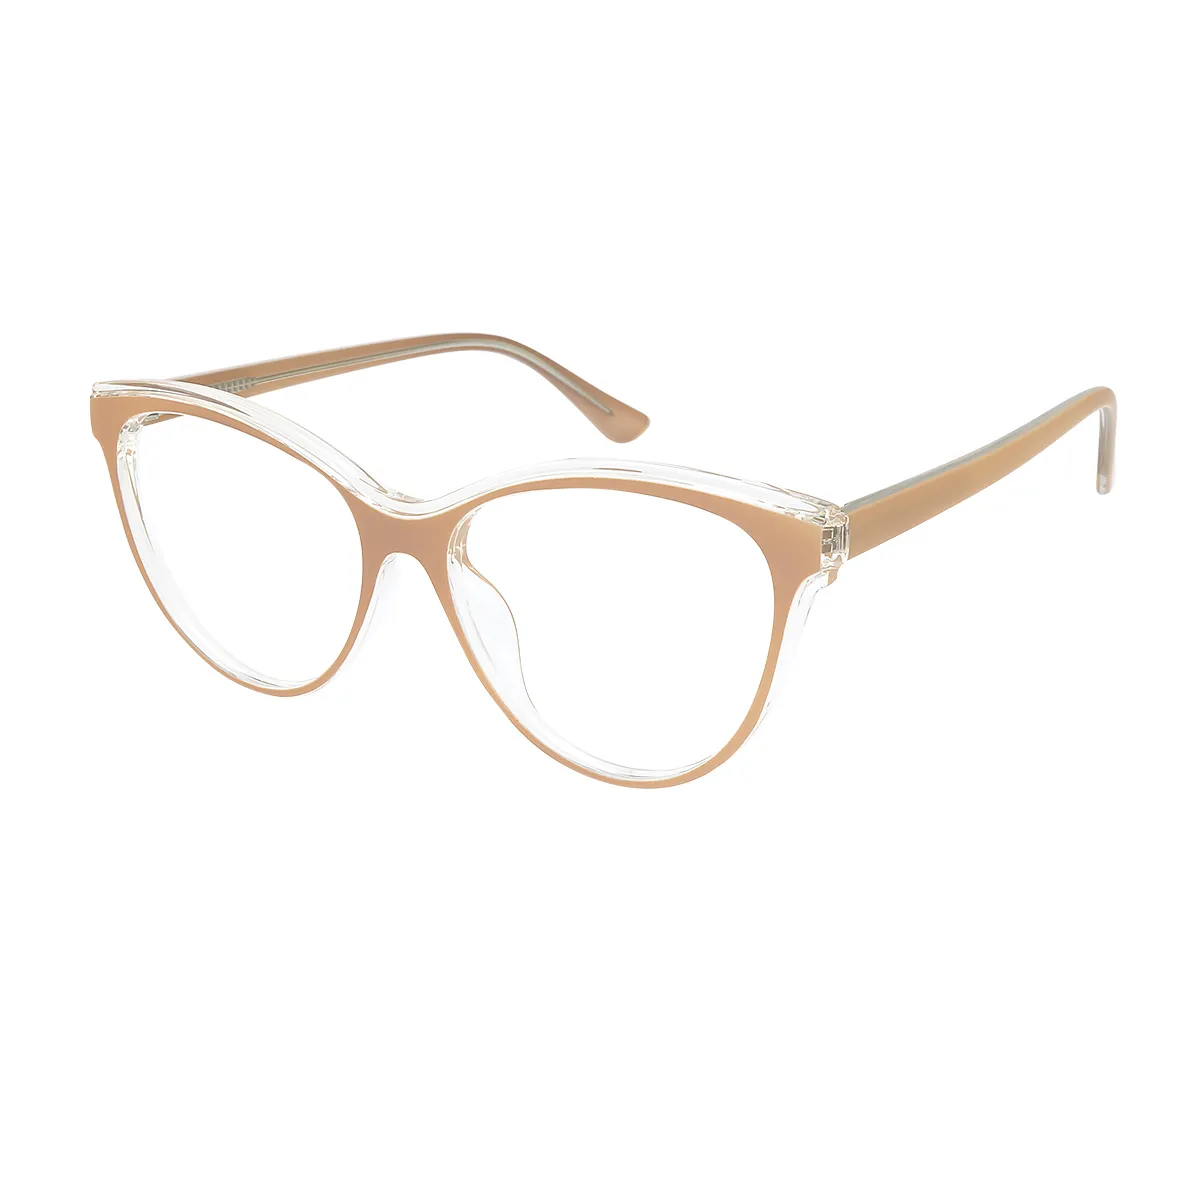 Fashion Cat-eye Wood Texture Glasses for Women